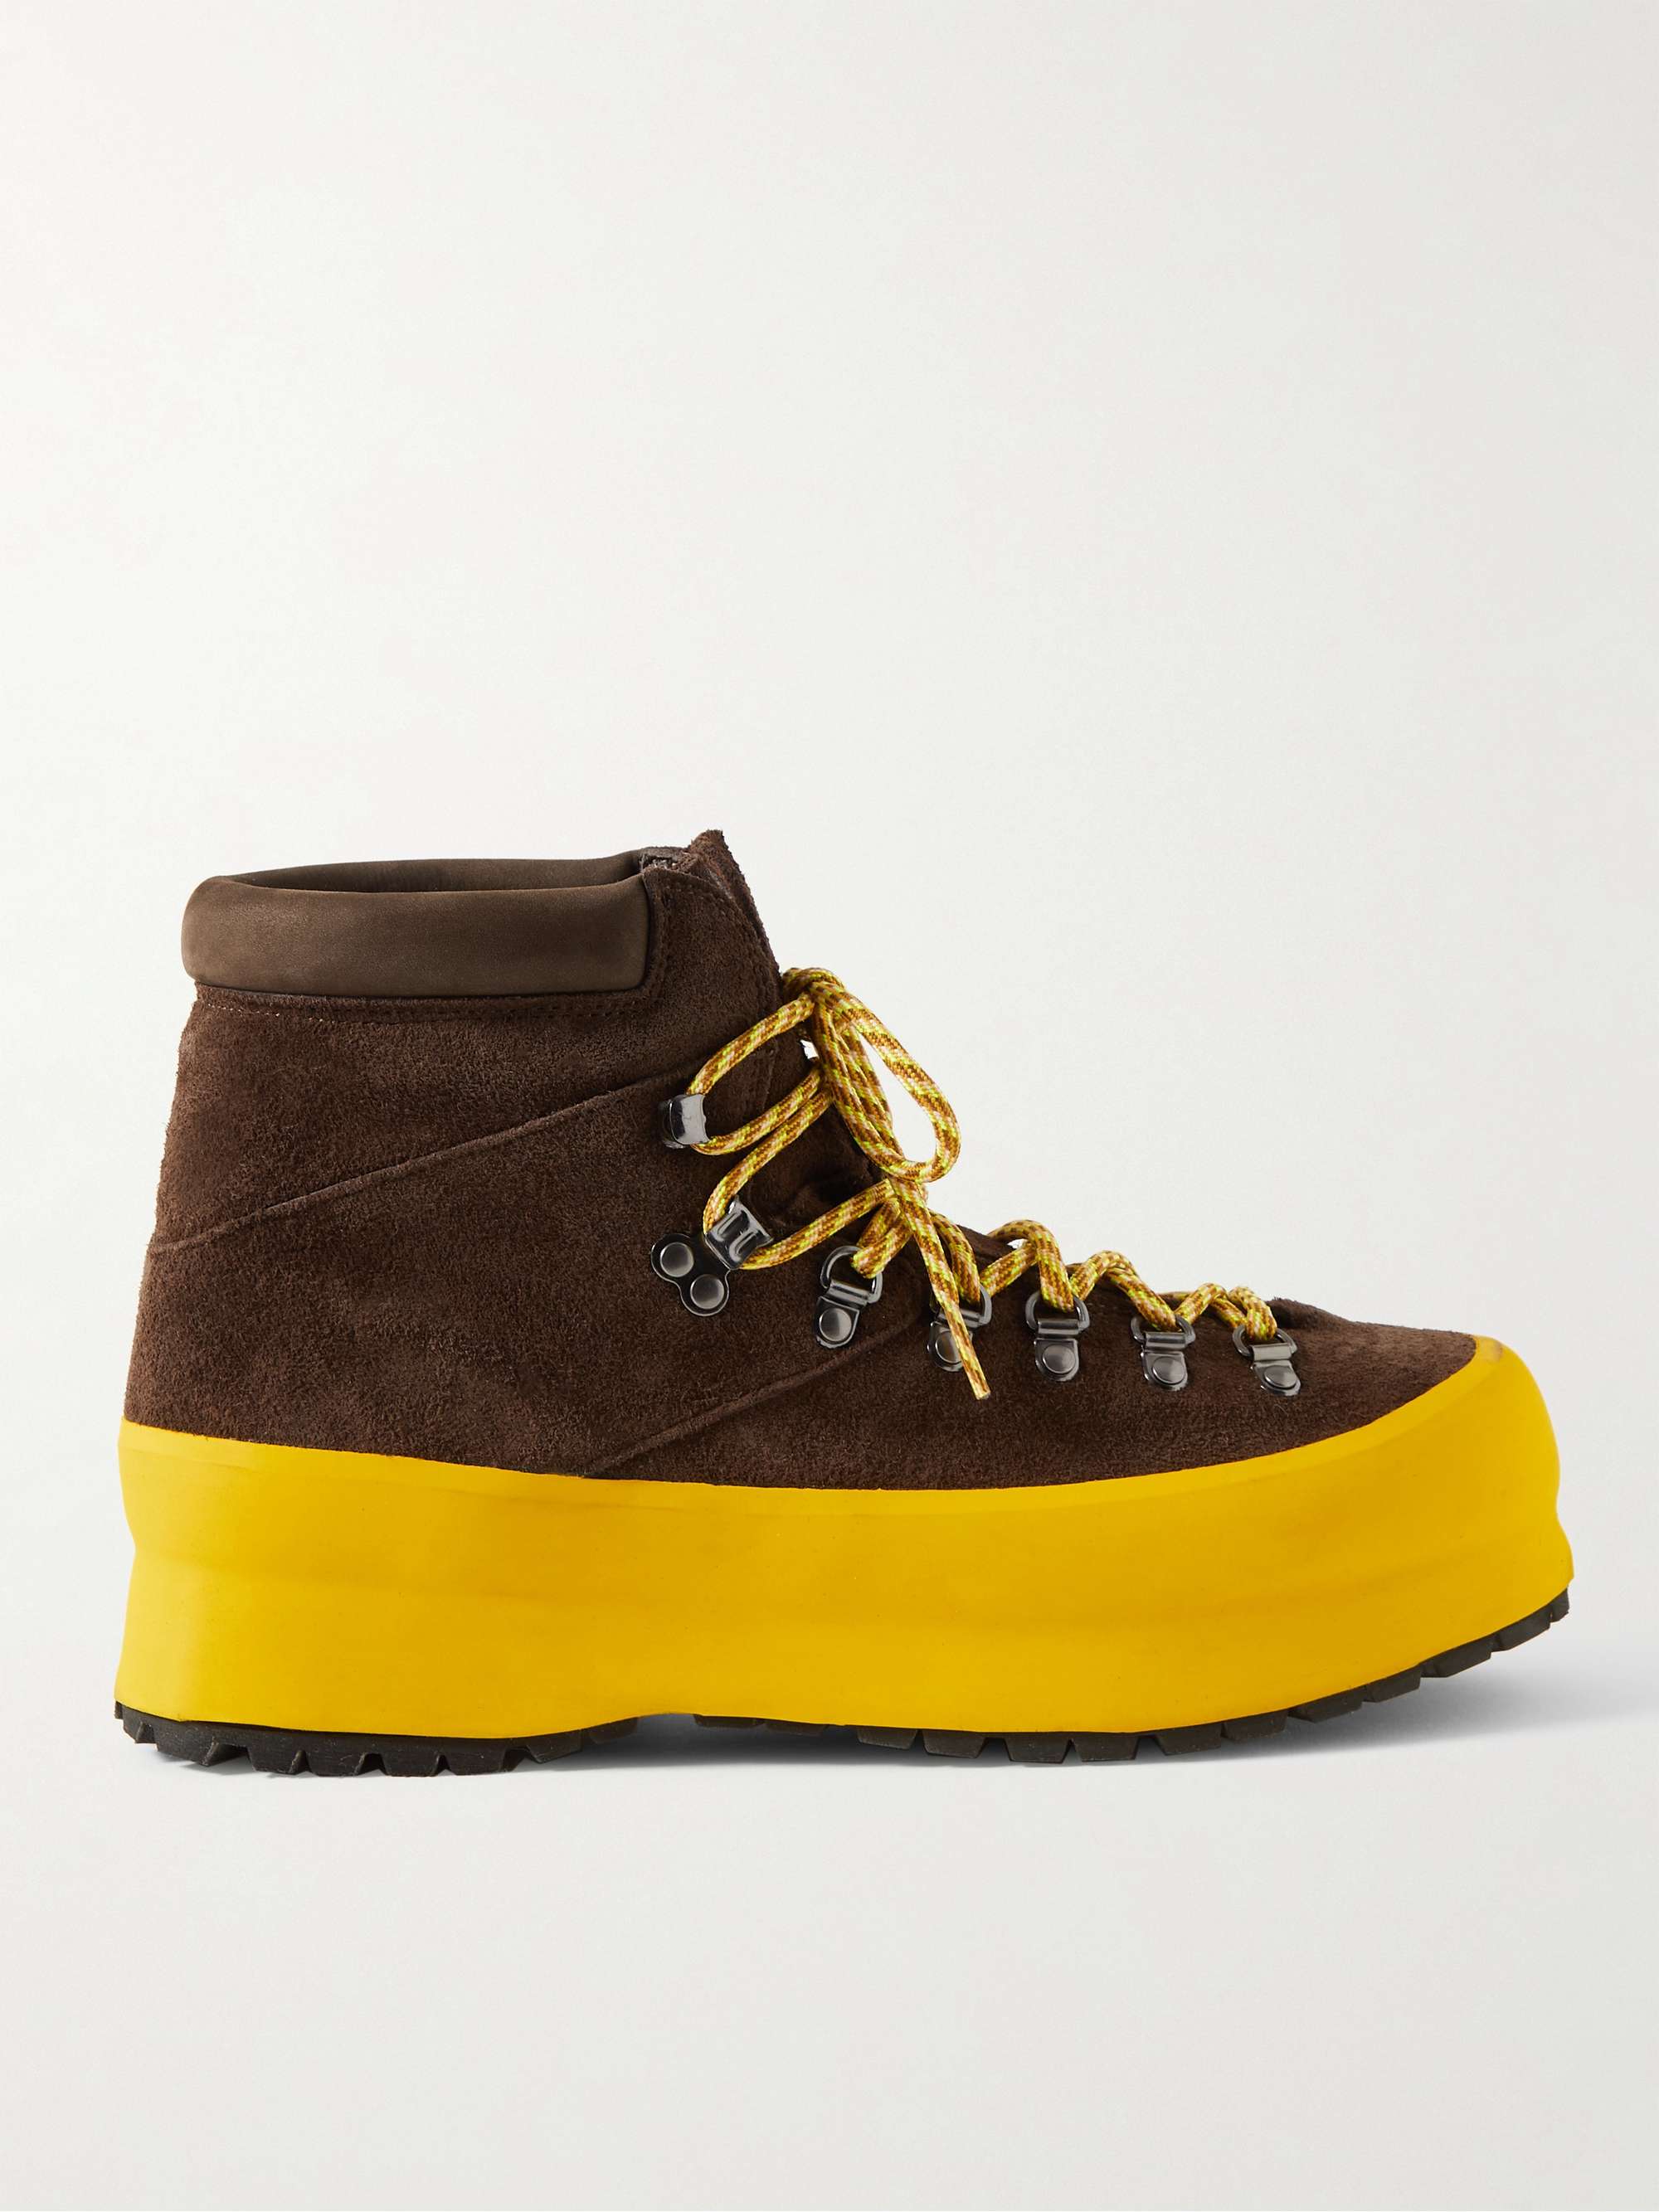 DIEMME + Throwing Fits Rosset Rubber-Trimmed Suede Boots for Men